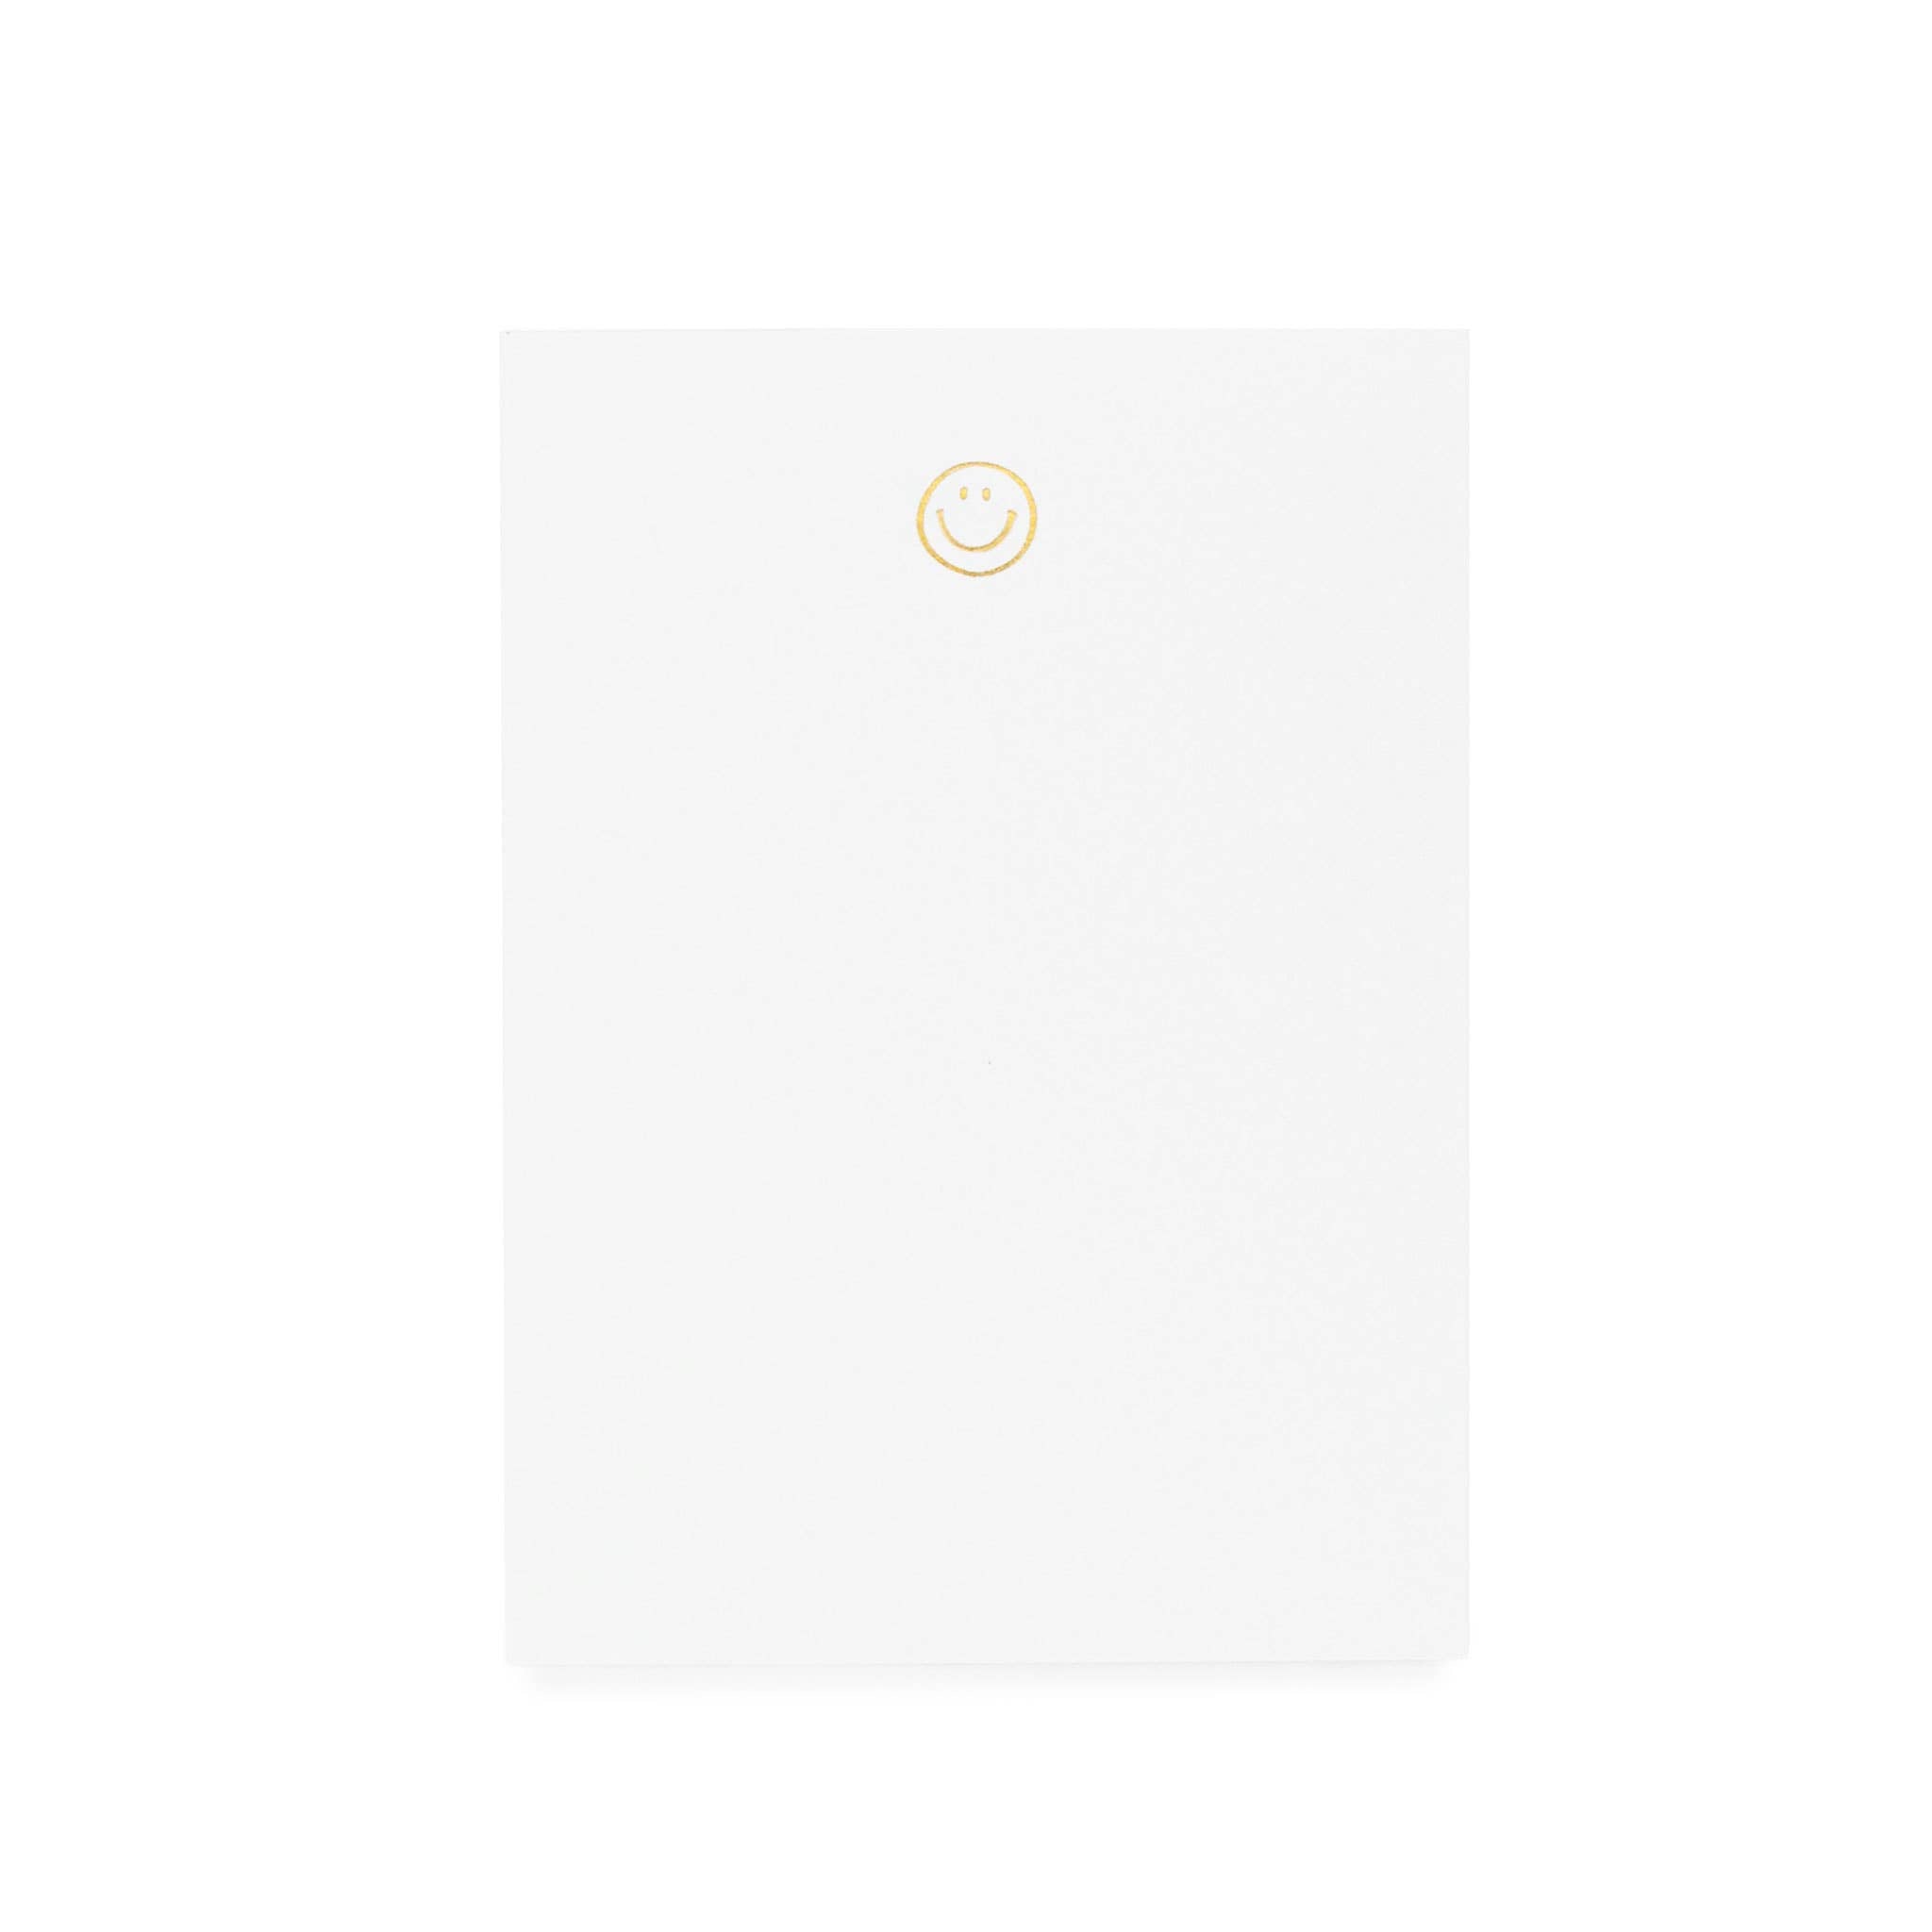 Blank white notebook with a yellow smiley face in the center.